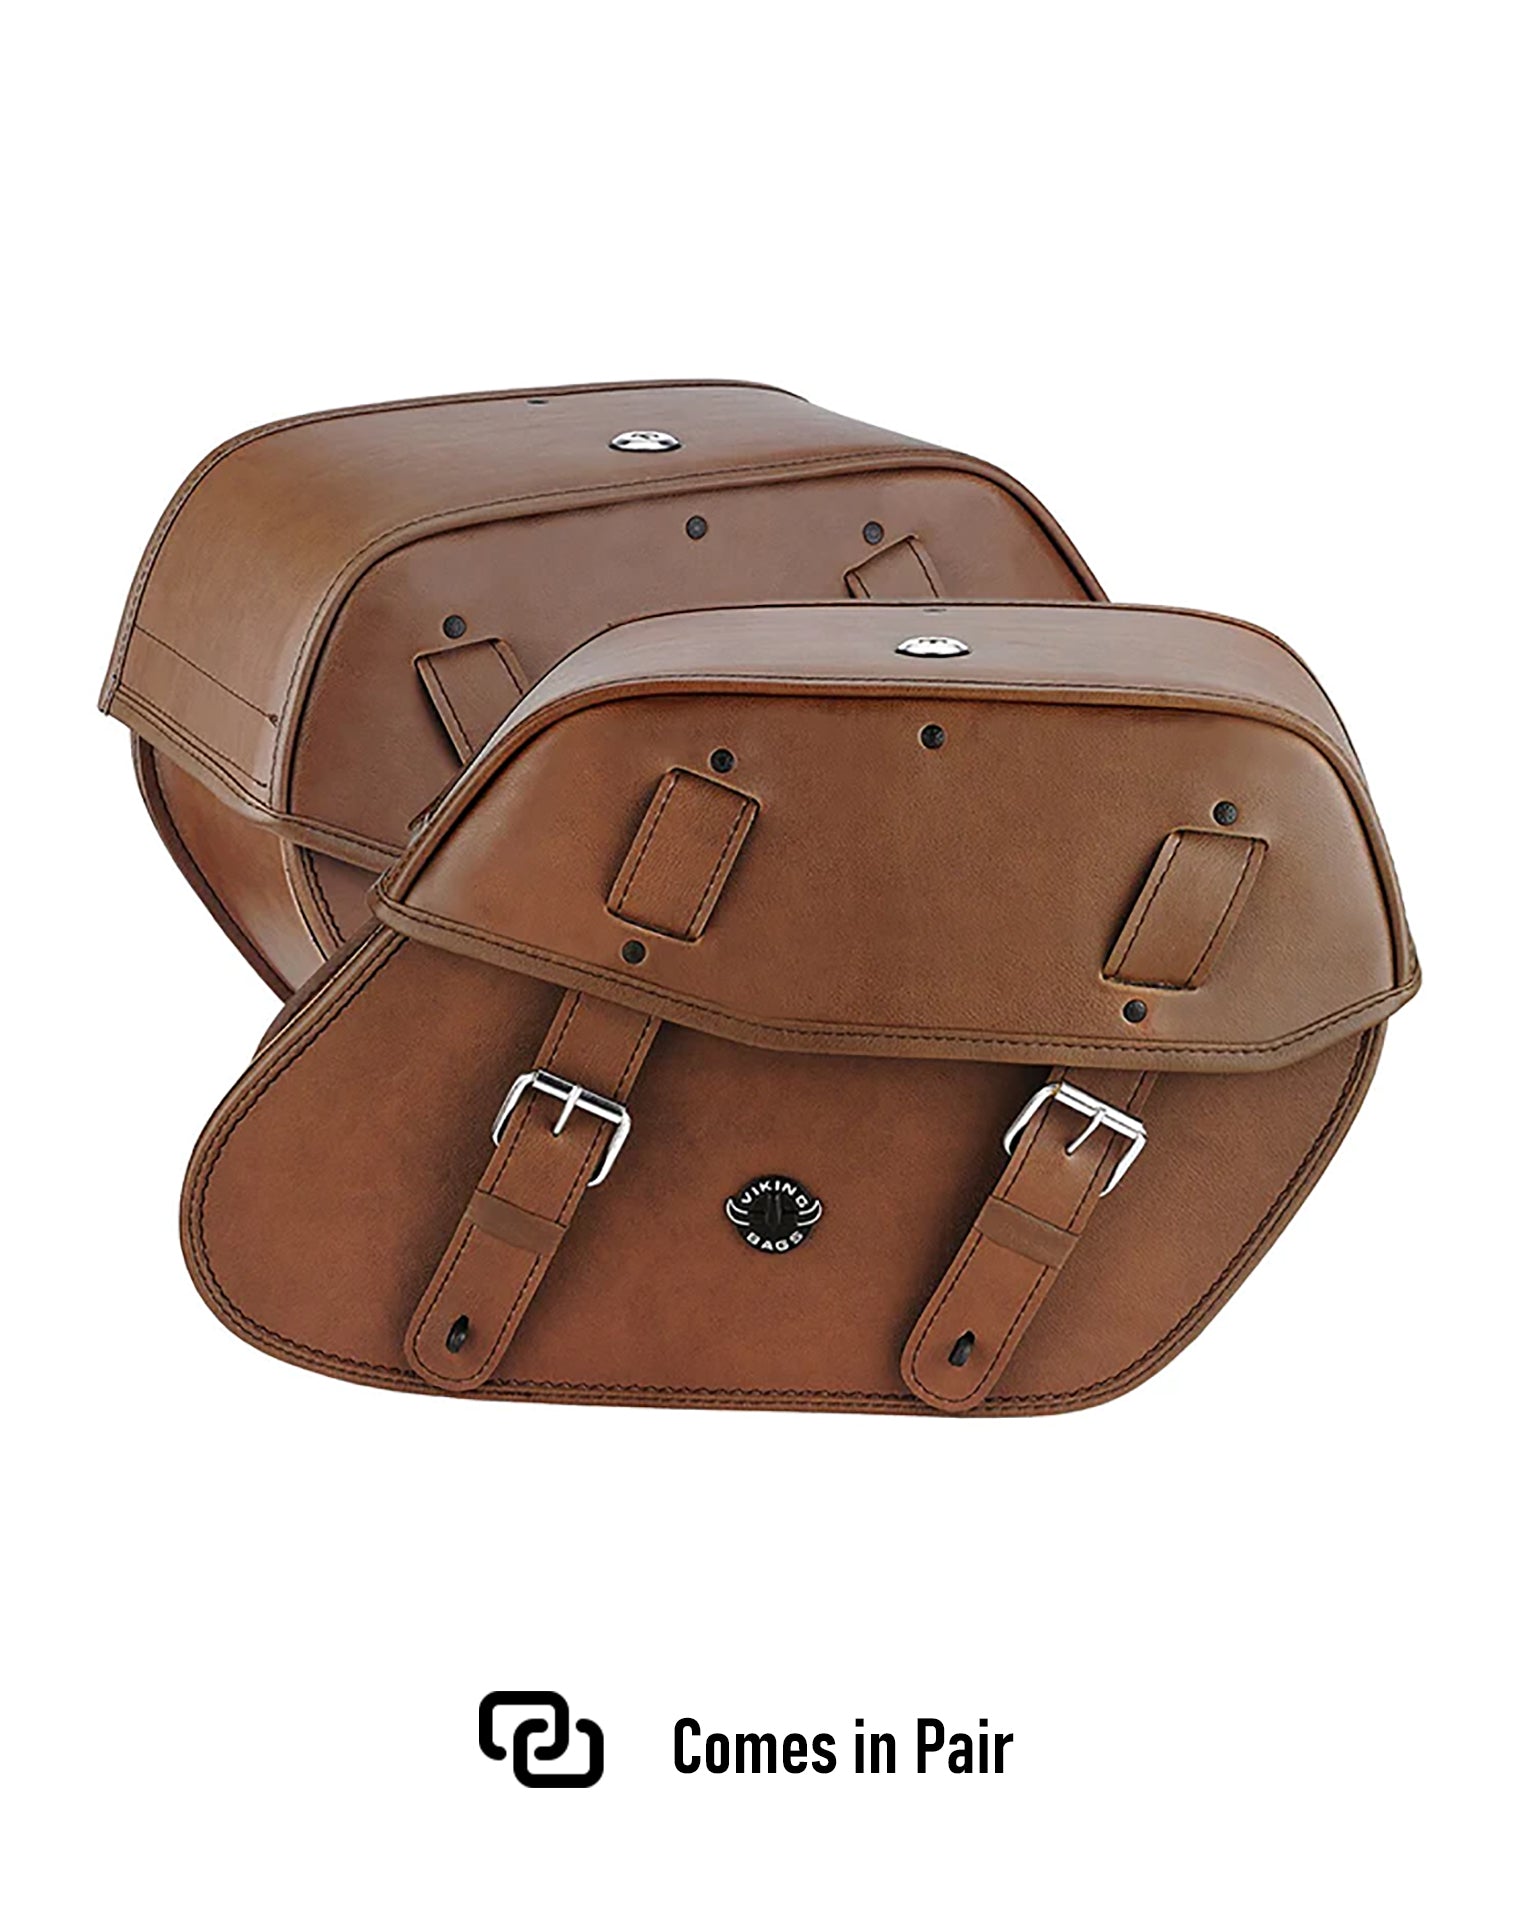 Viking Odin Brown Large Leather Motorcycle Saddlebags For Harley Softail Street Bob Fxbb Weather Resistant Bags Comes in Pair